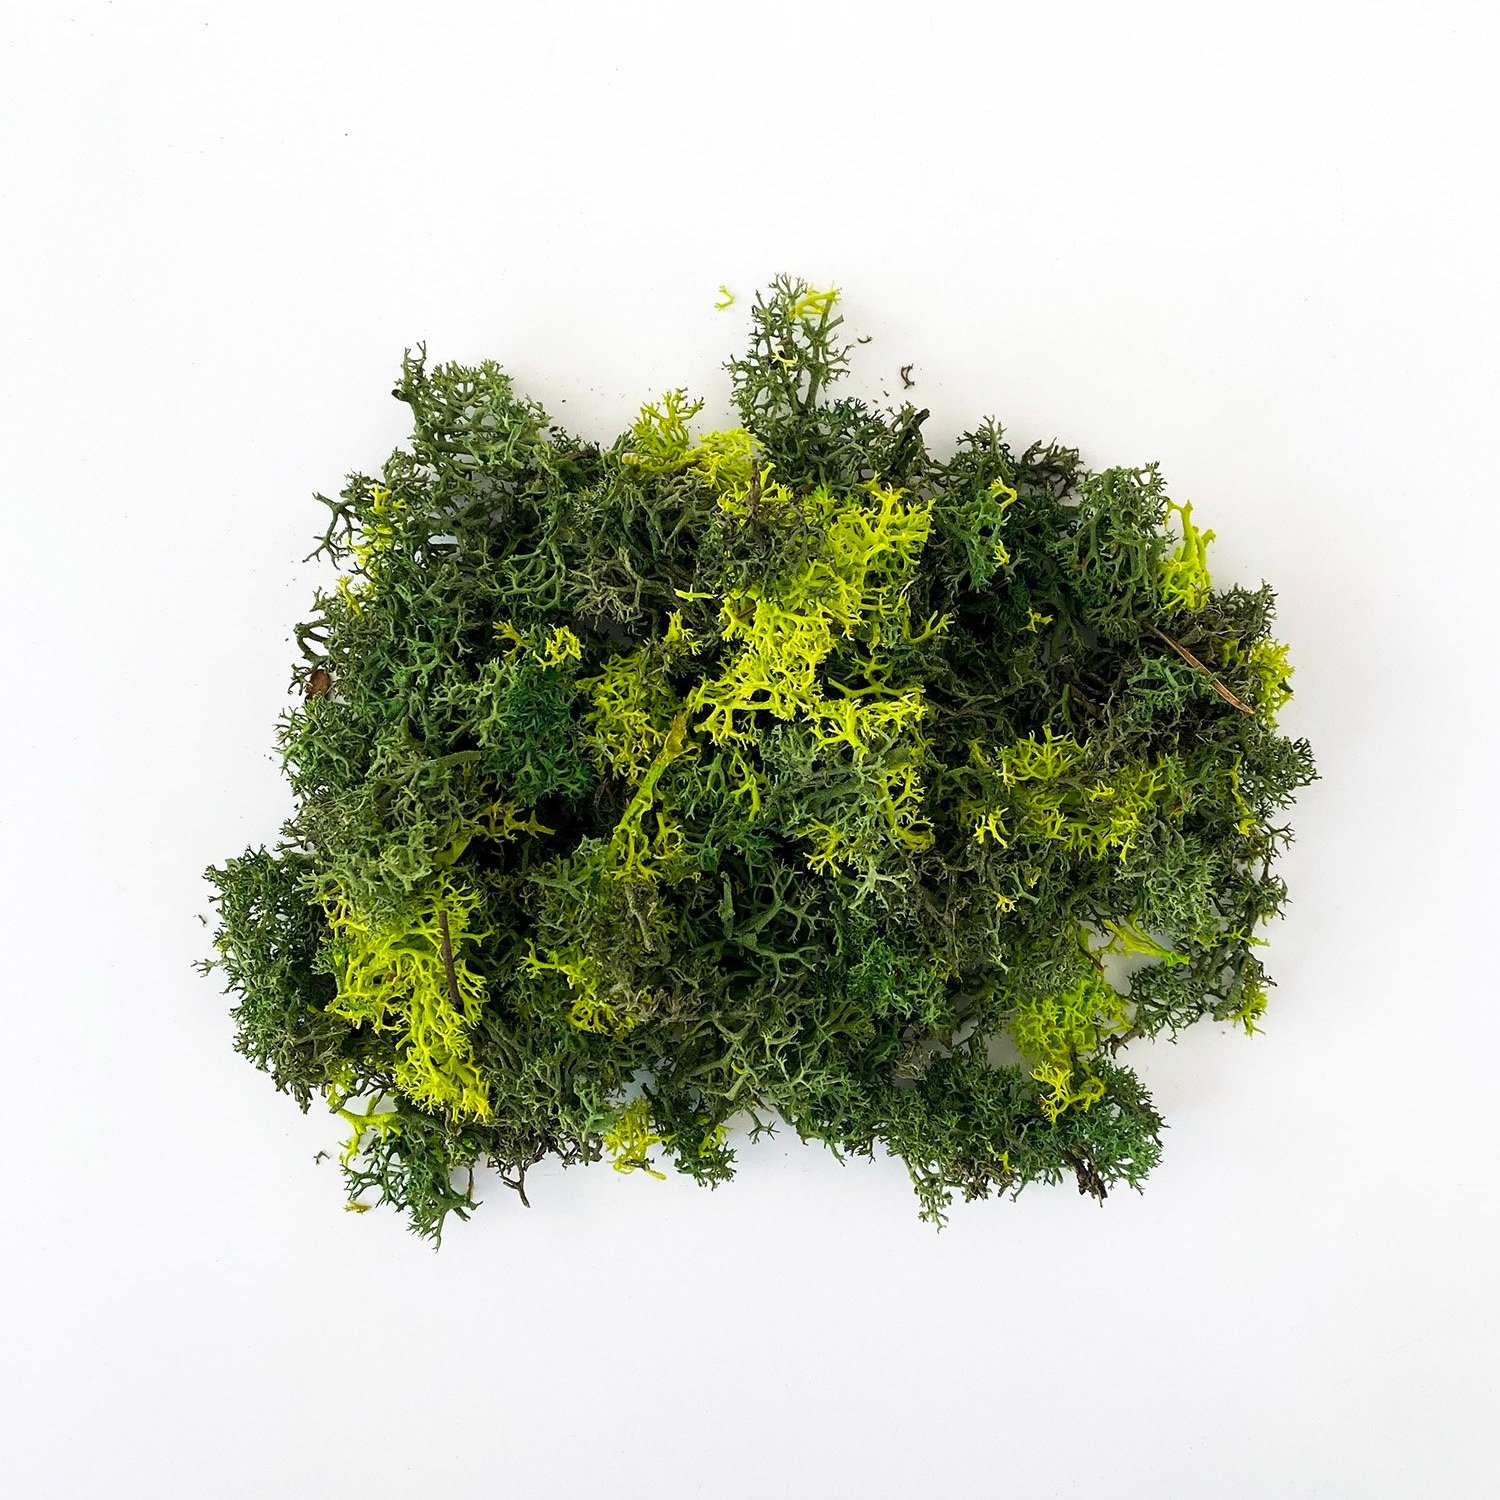 Whats is decorative moss and how do you maintain it? — La Résidence